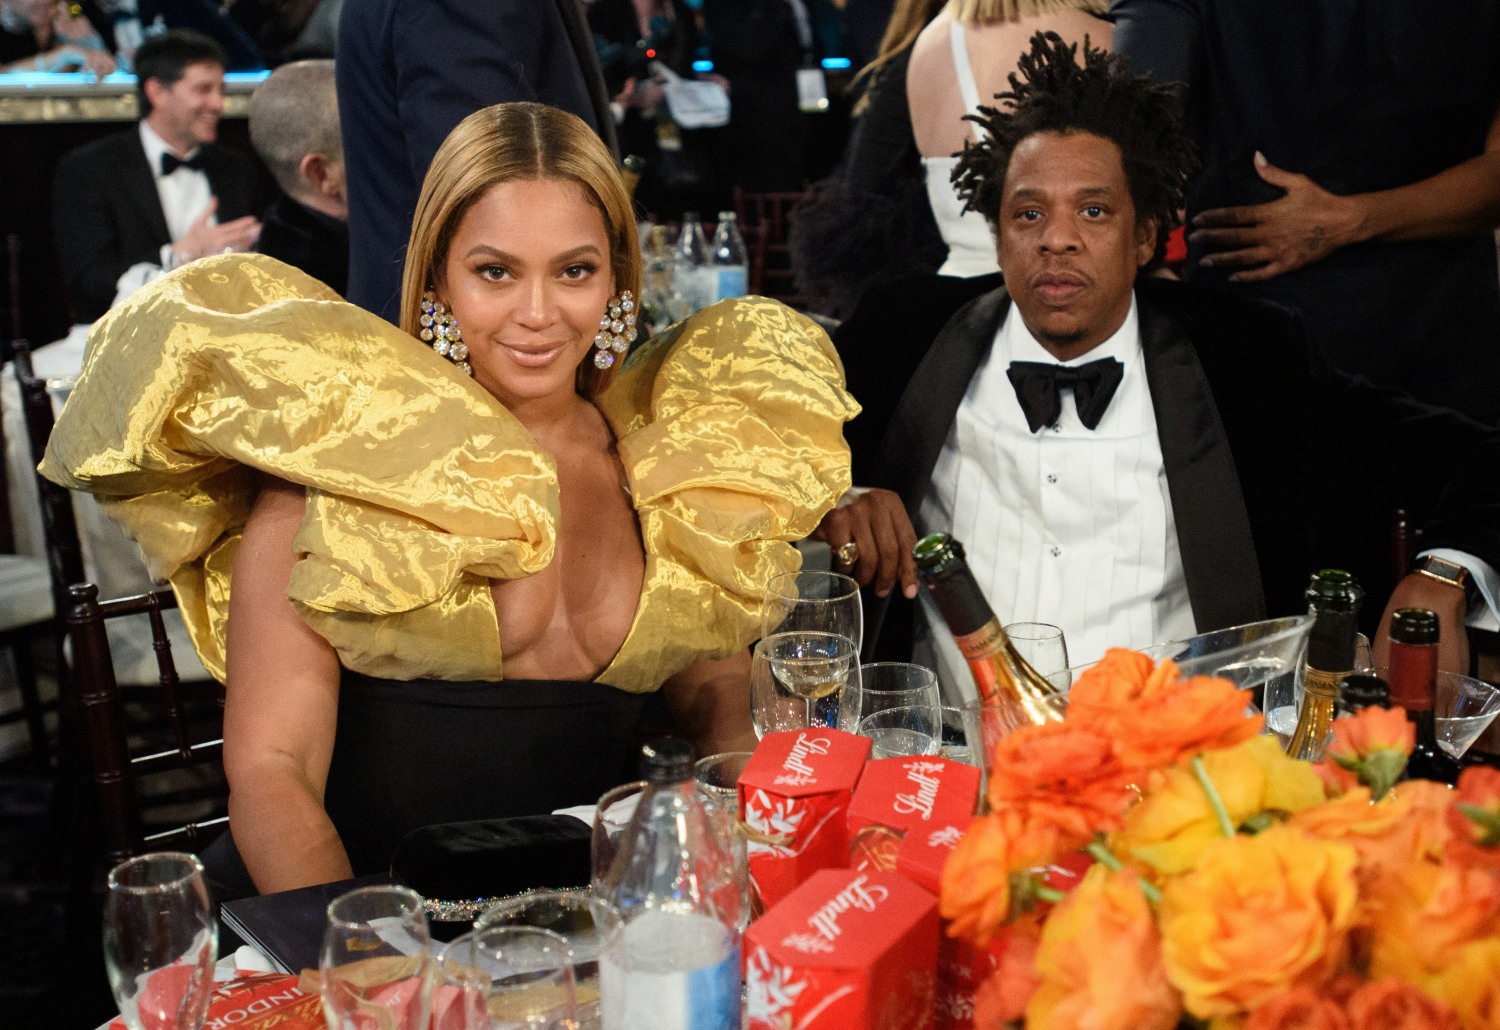 Nominee, Beyonce Knowles-Carter, and Jay-Z at the 77th Annual Golden Globe Awards at the Beverly Hilton in Beverly Hills, CA on Sunday, January 5, 2020.